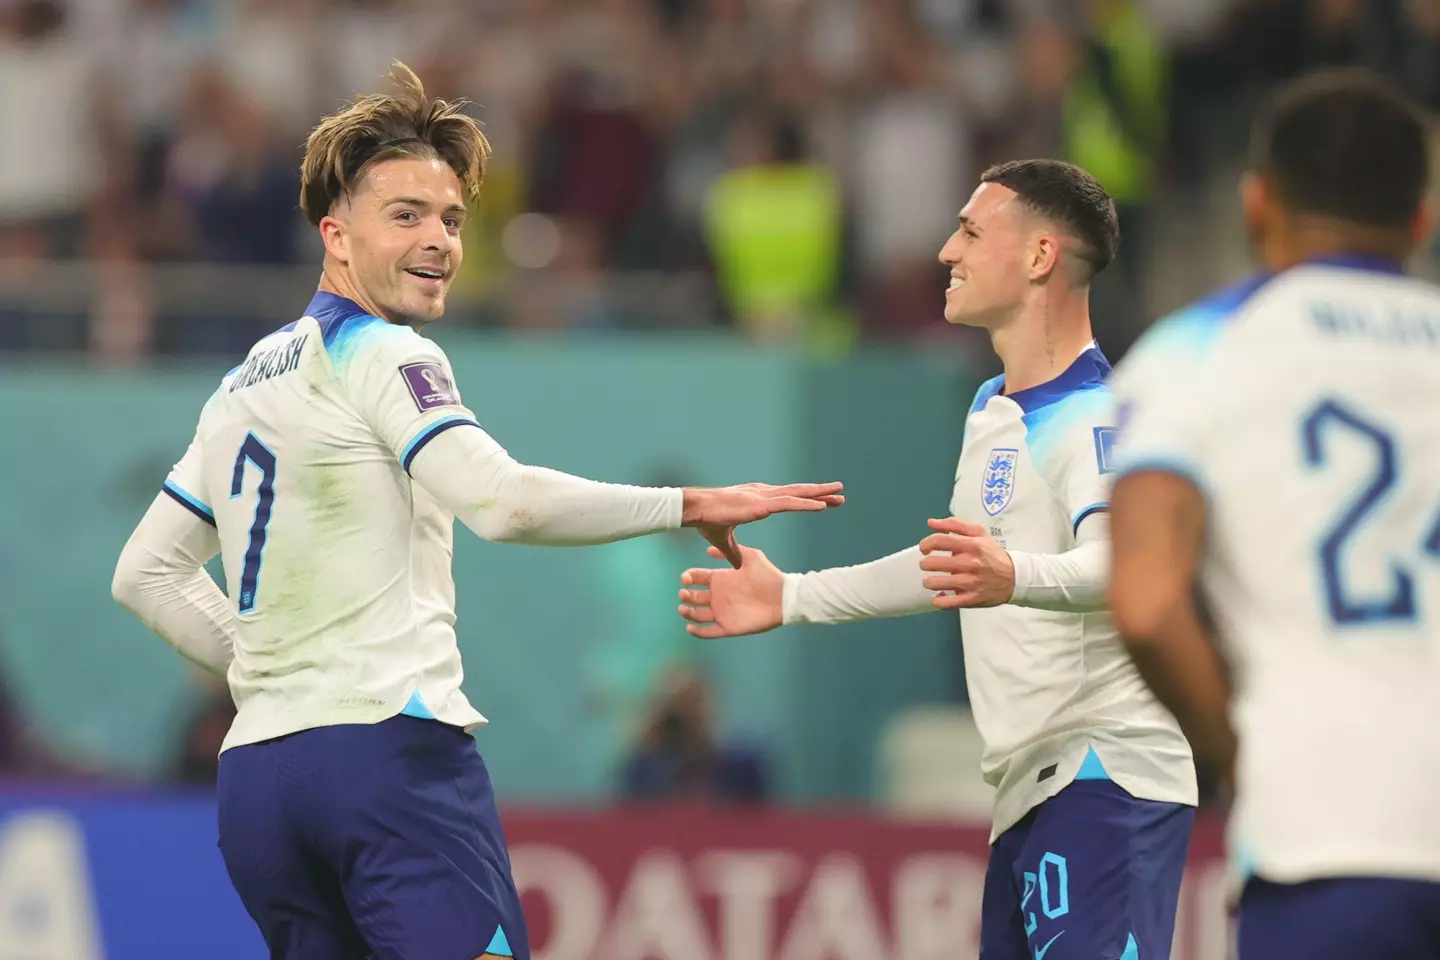 Grealish and Foden celebrate the former's goal in England's 6-2 win over Iran. (Image